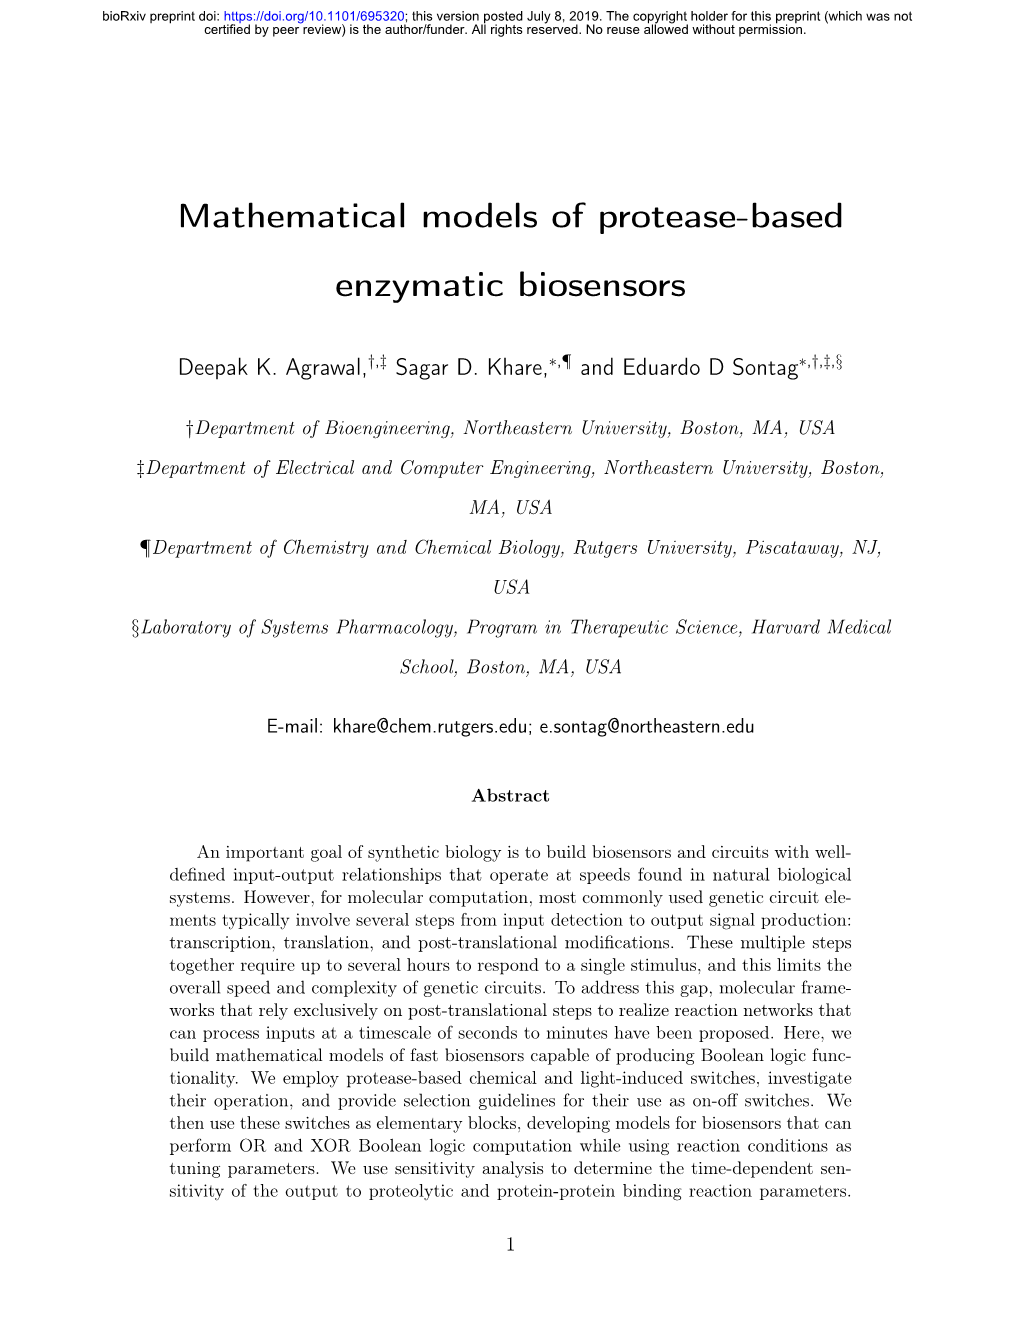 Mathematical Models of Protease-Based Enzymatic Biosensors